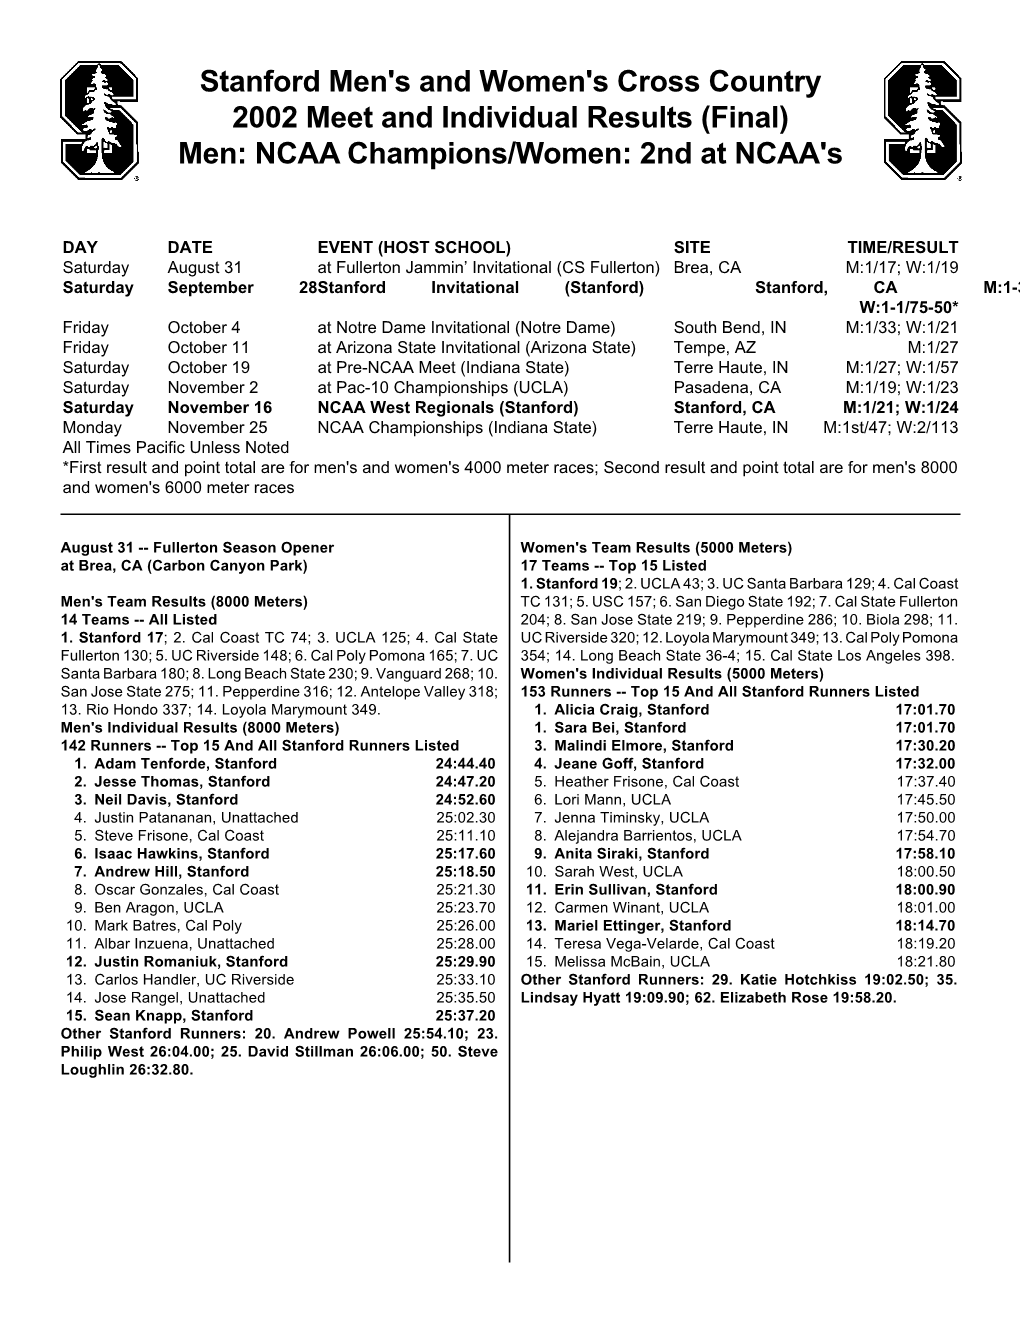 2001 Cross Country Results